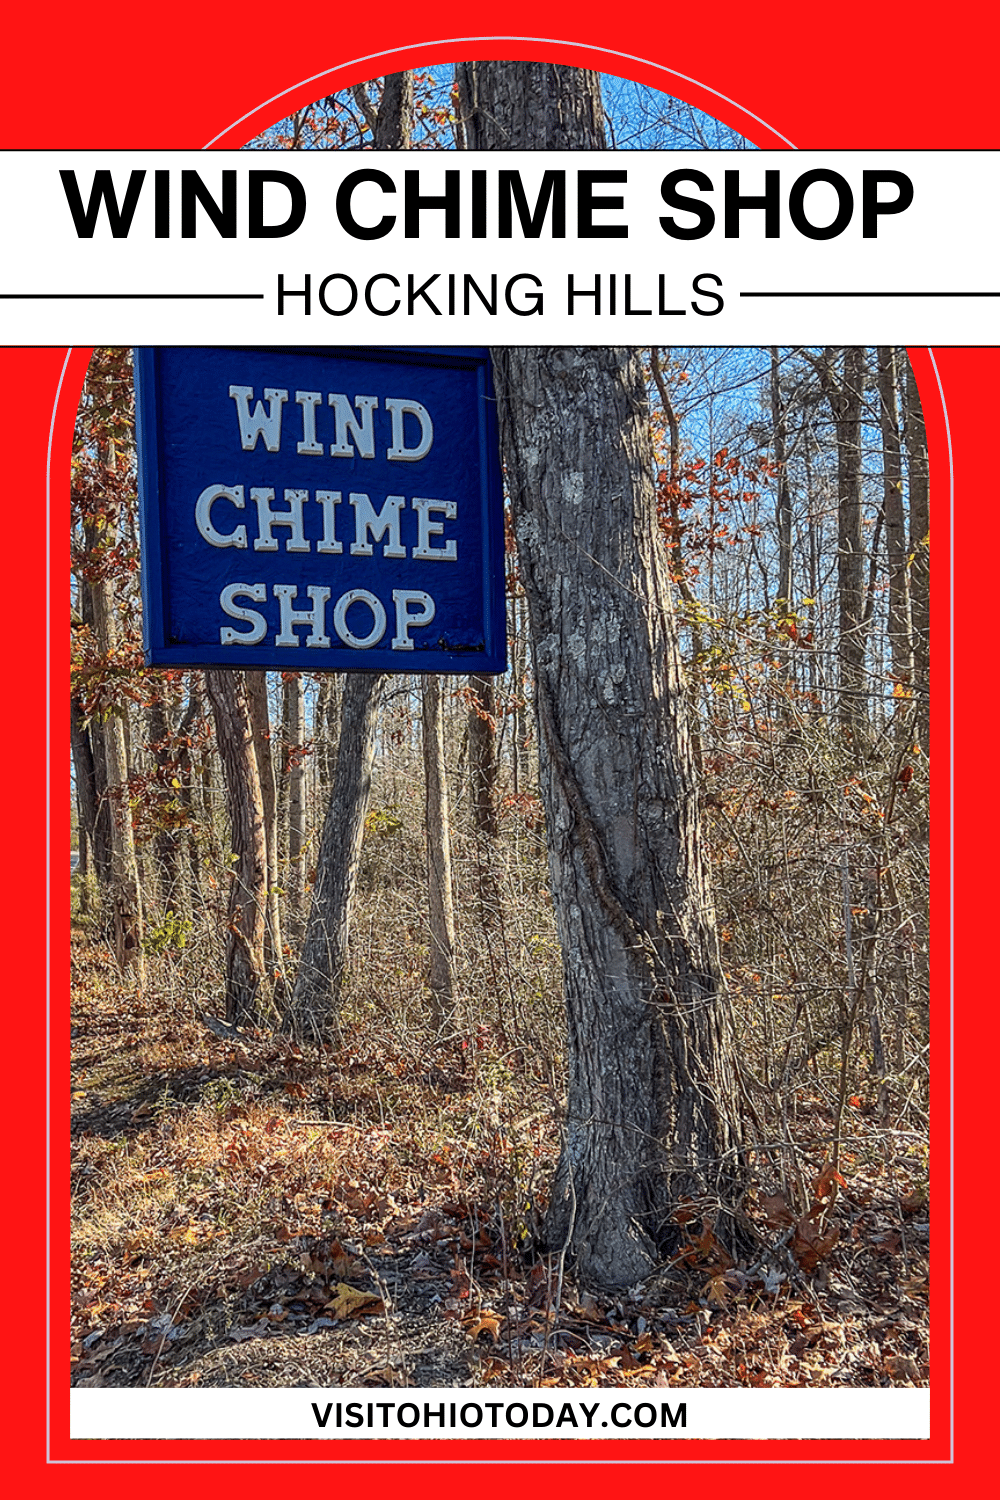 Wind Chime Shop is a small business located in Hocking Hills, owned by local residents Mike and Judy Hard.